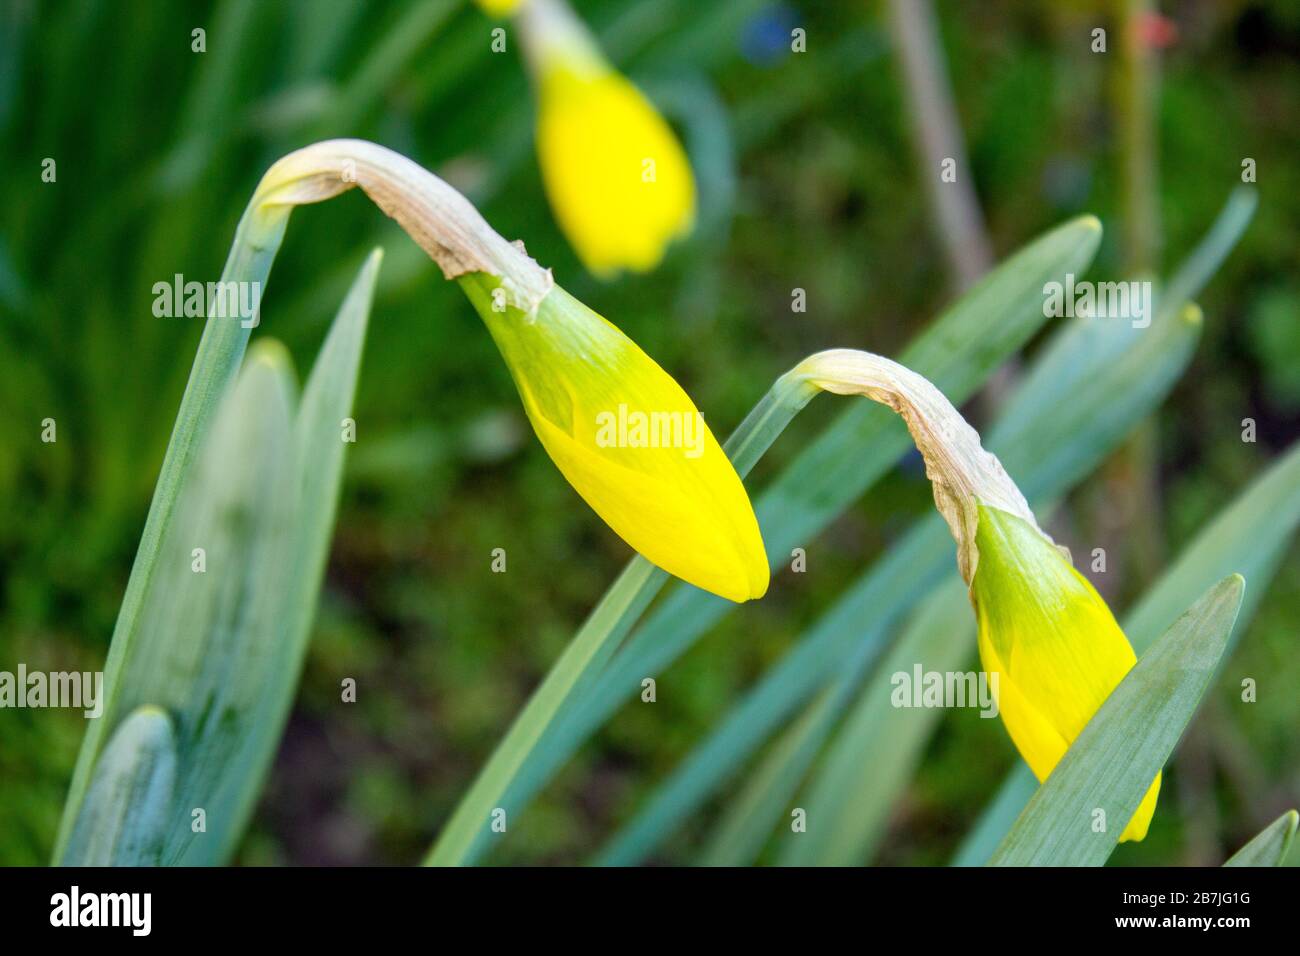 Yellow narcissus, also known as lent lily, is just before flowering and is the best-known plant from the narcissus genus within the amaryllis family Stock Photo